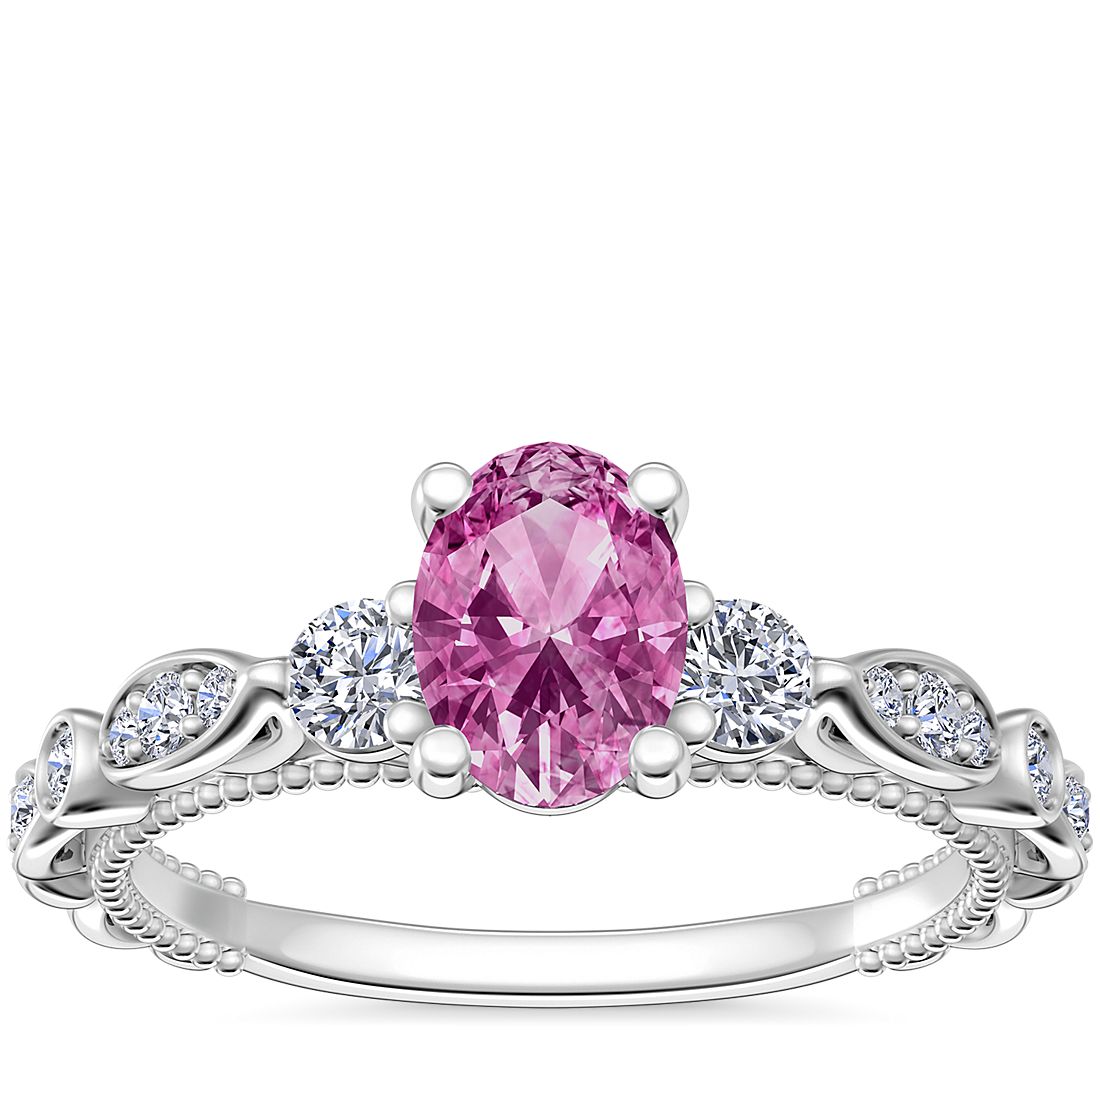 Floral Ellipse Diamond Cathedral Engagement Ring with Oval Pink Sapphire in 14k White Gold (7x5mm)